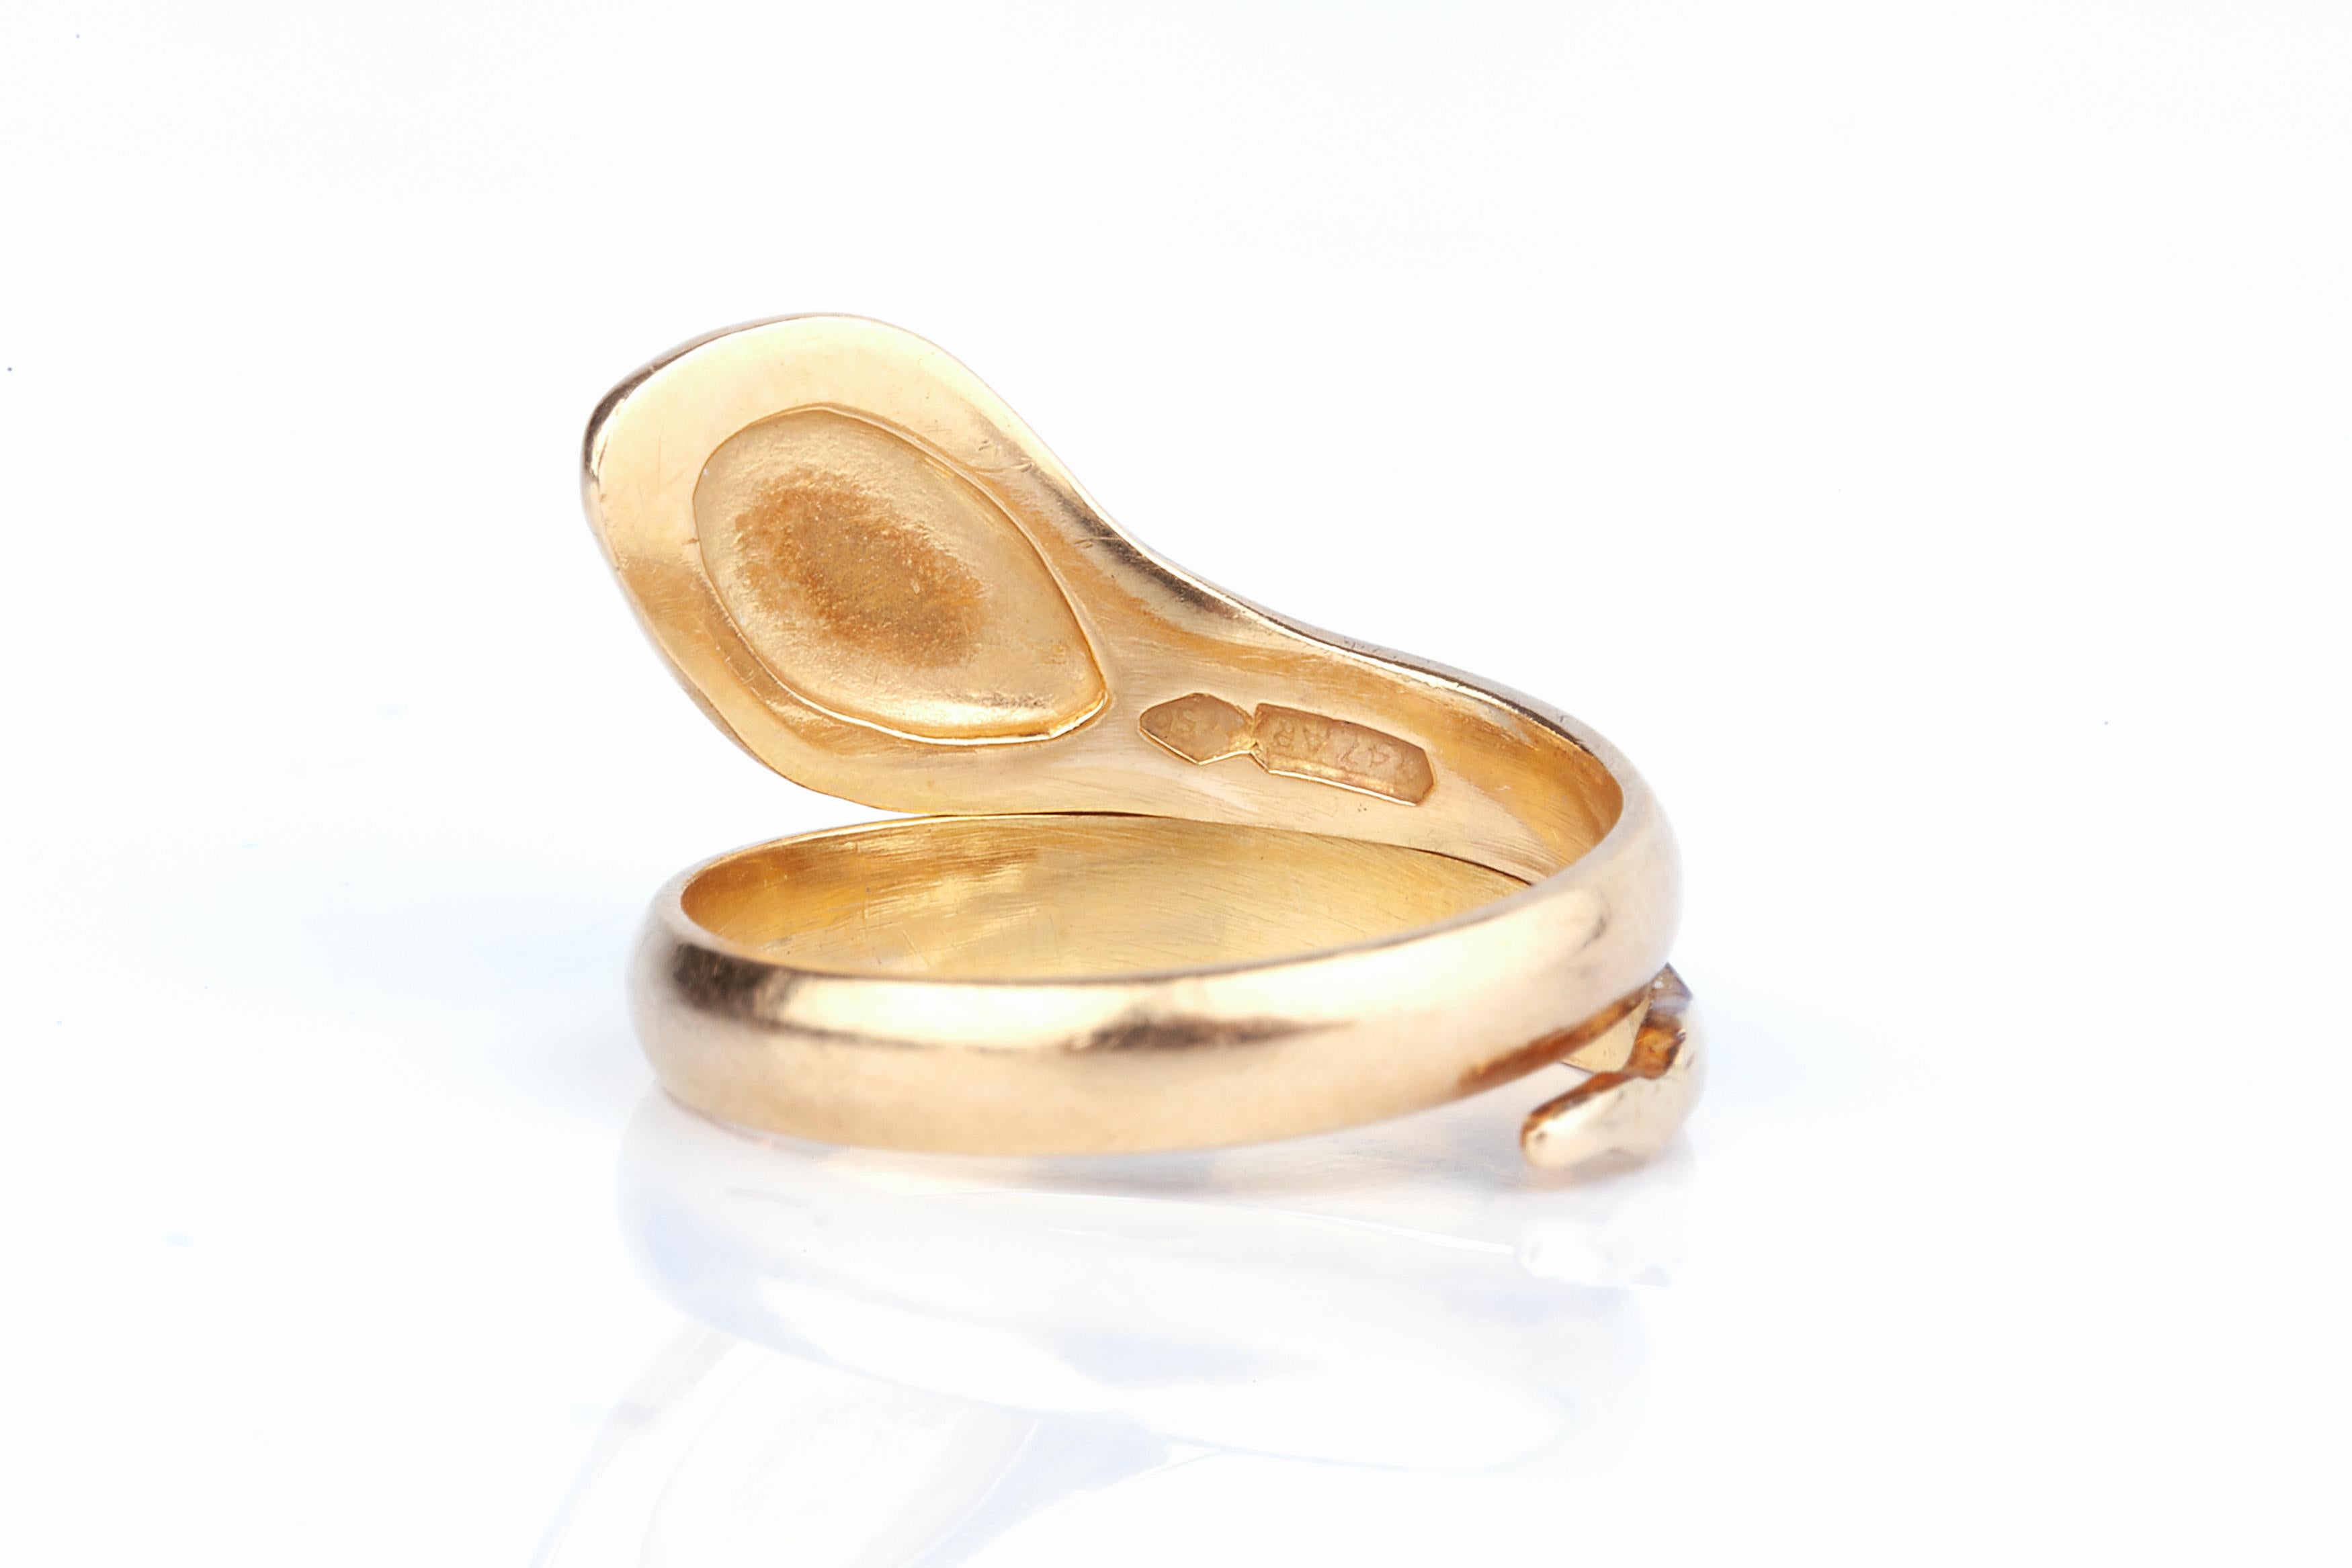 An 18k gold snake ring in the form of a simple snake coiled around the finger.  The ring is hallmarked for 18k gold and is size US 4 1/2